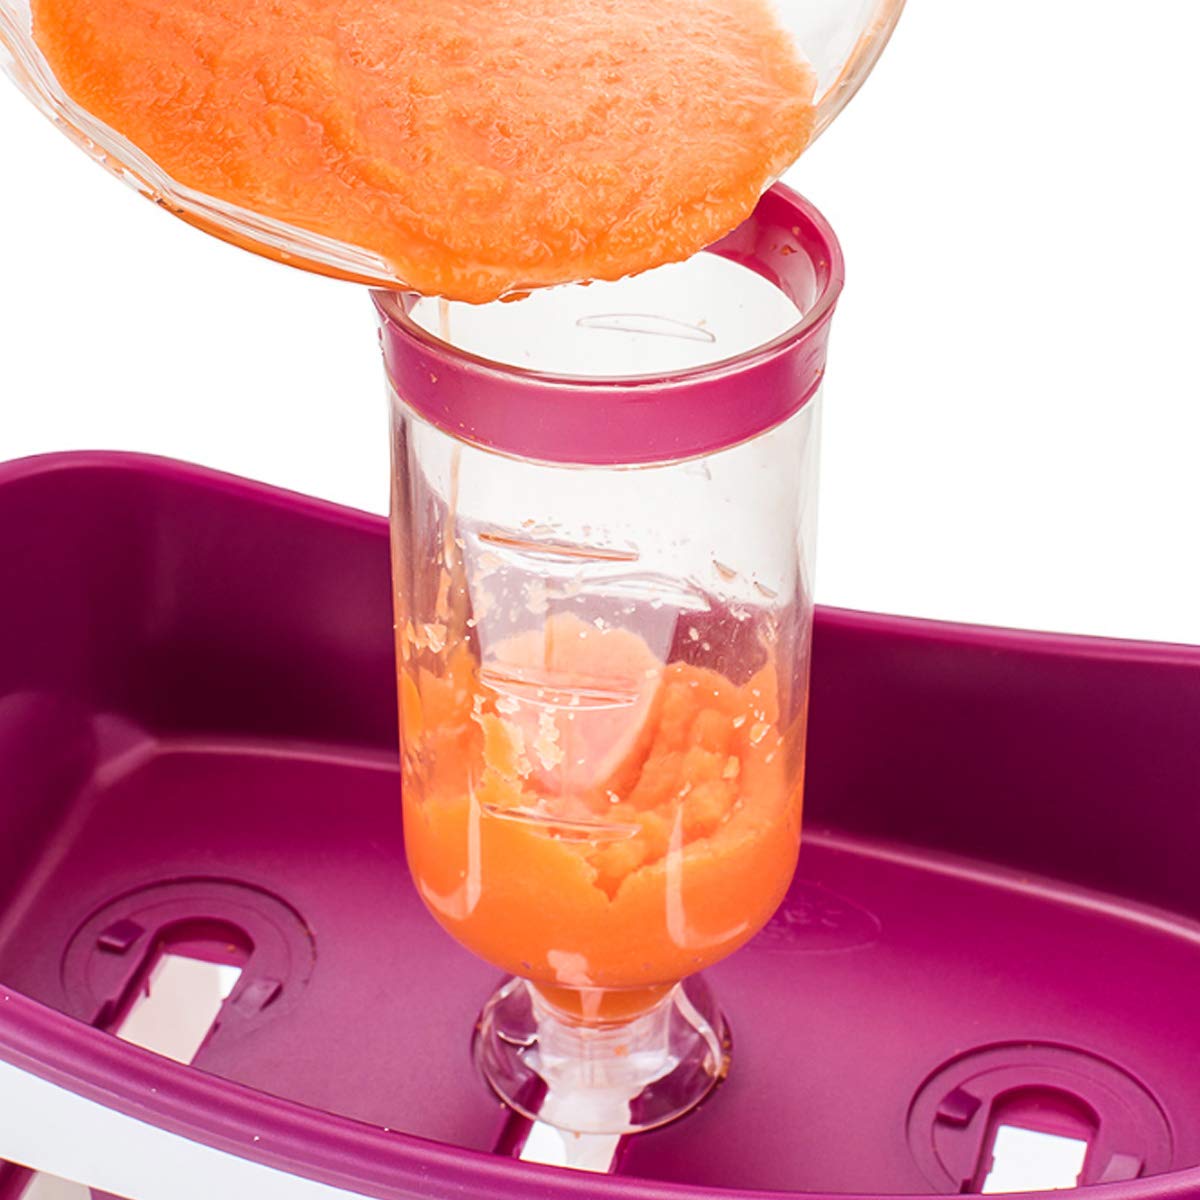 Squeeze Station Homemade Infant Baby Fresh Fruit Juice Food Maker with Storage Bags 8.26"x8.66"x3.54"